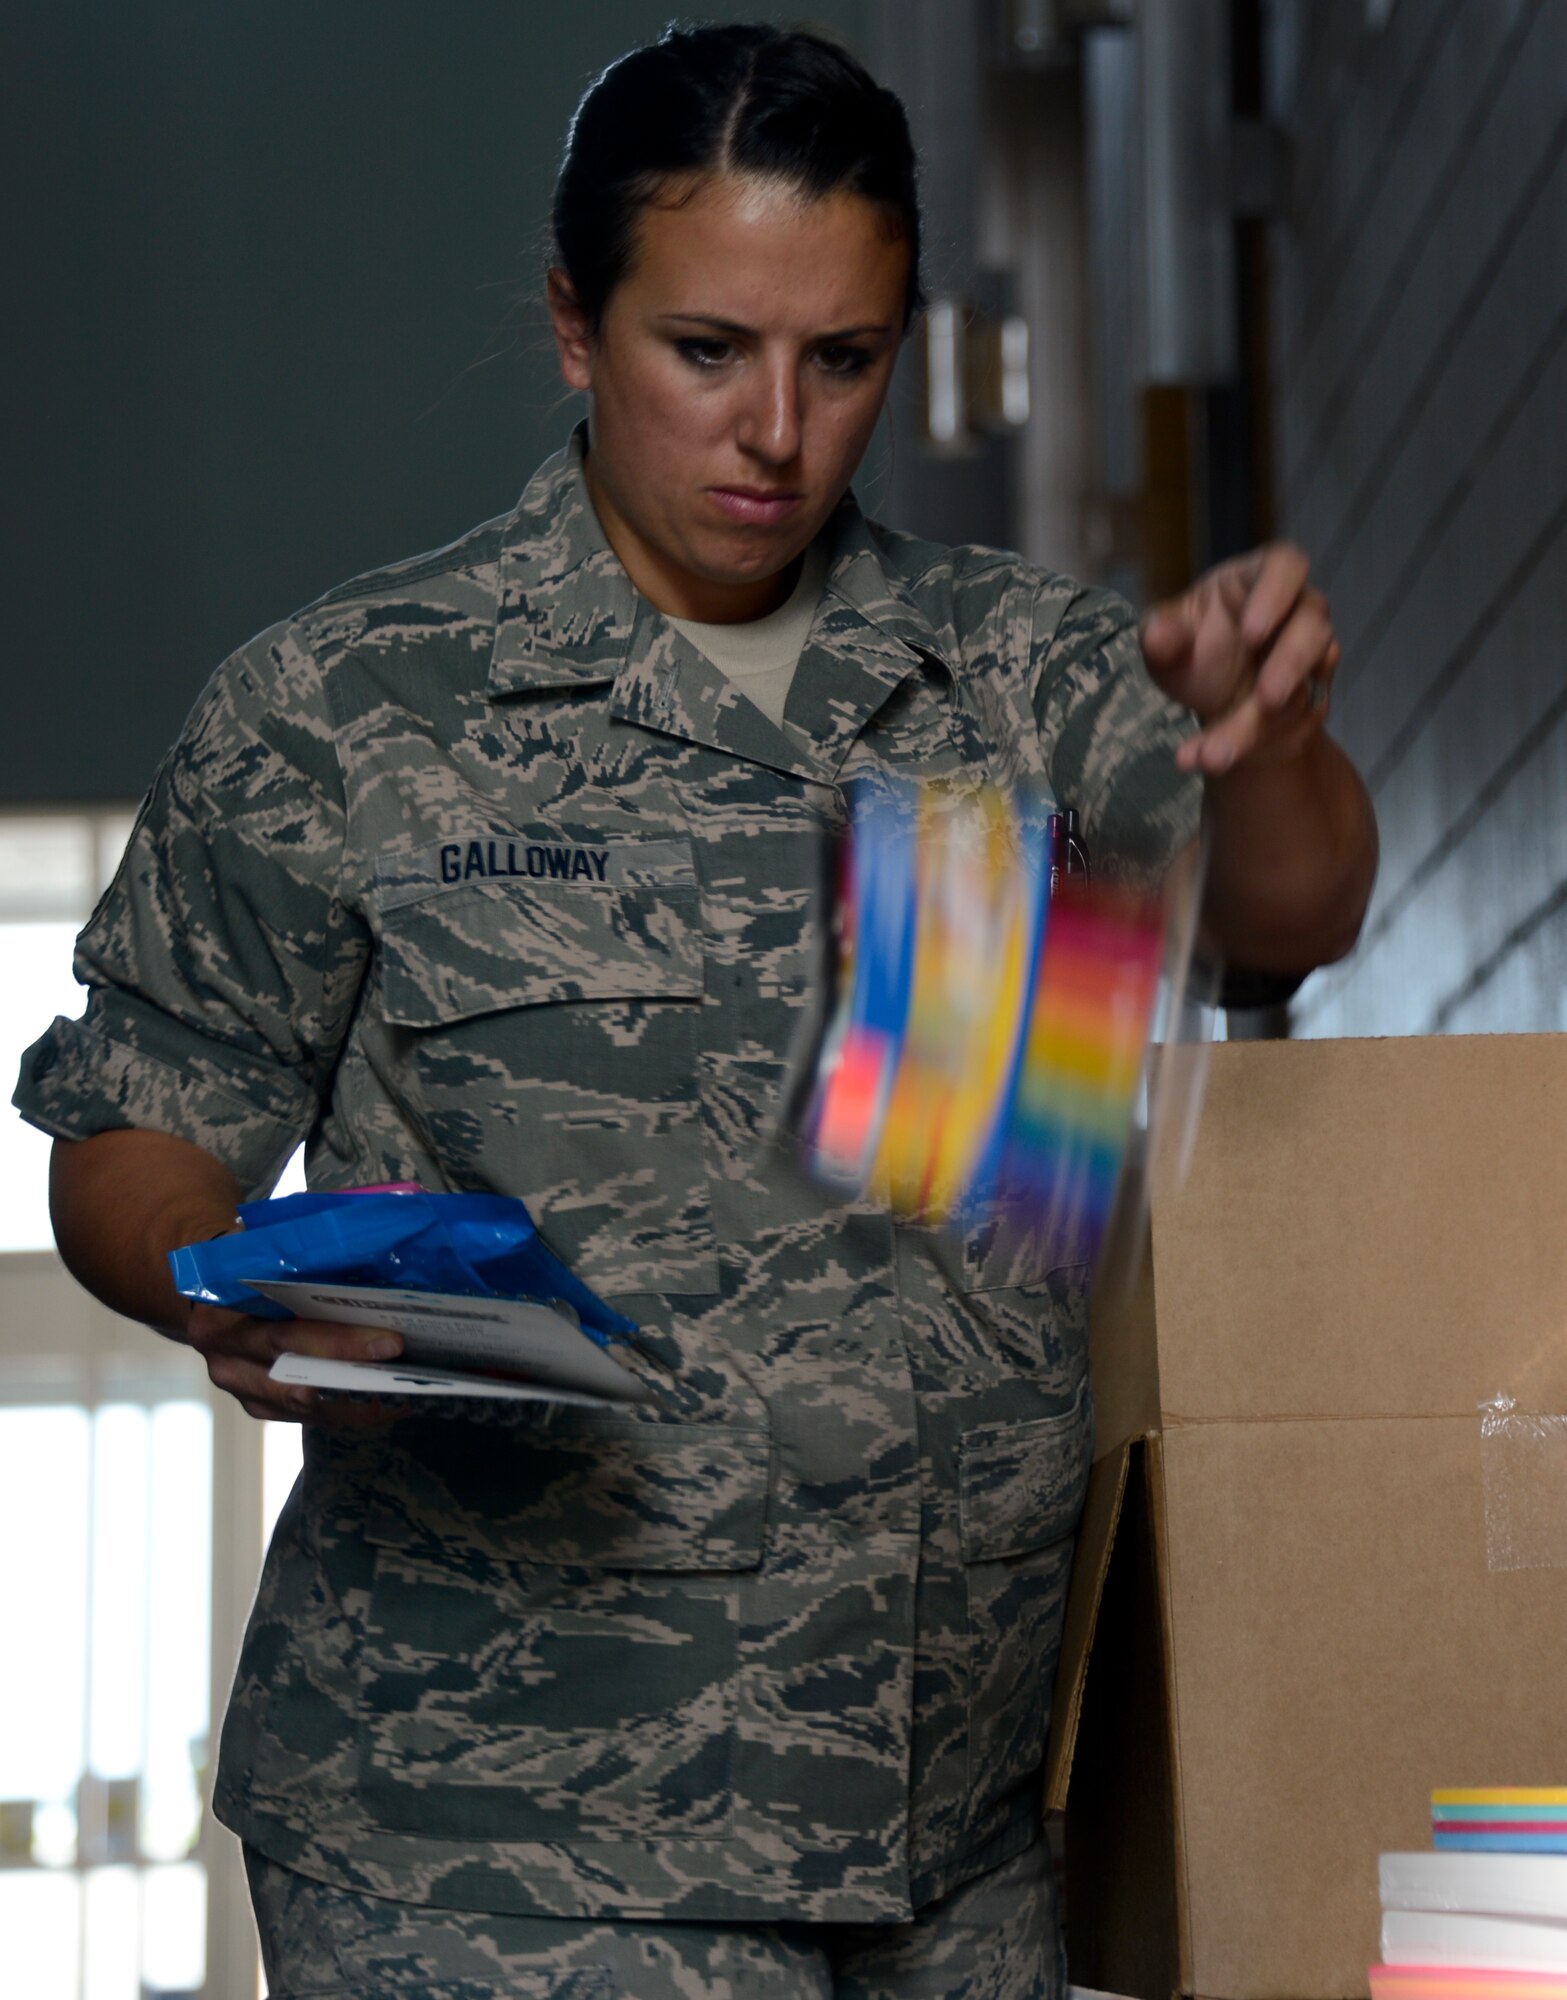 Master Sgt. Crystal Galloway, 133rd Maintenance Operations Flight, tosses makers into the pile for donation in St. Paul, Minn., Aug. 15, 2013. The school supplies were donated from customers at Dollar Trees stores throughout the Twins Cities area in support of Operation Homefront and the Back-to-School-Brigade.  

(U.S. Air National Guard photo by Tech. Sgt. Amy M. Lovgren/ Released) 

